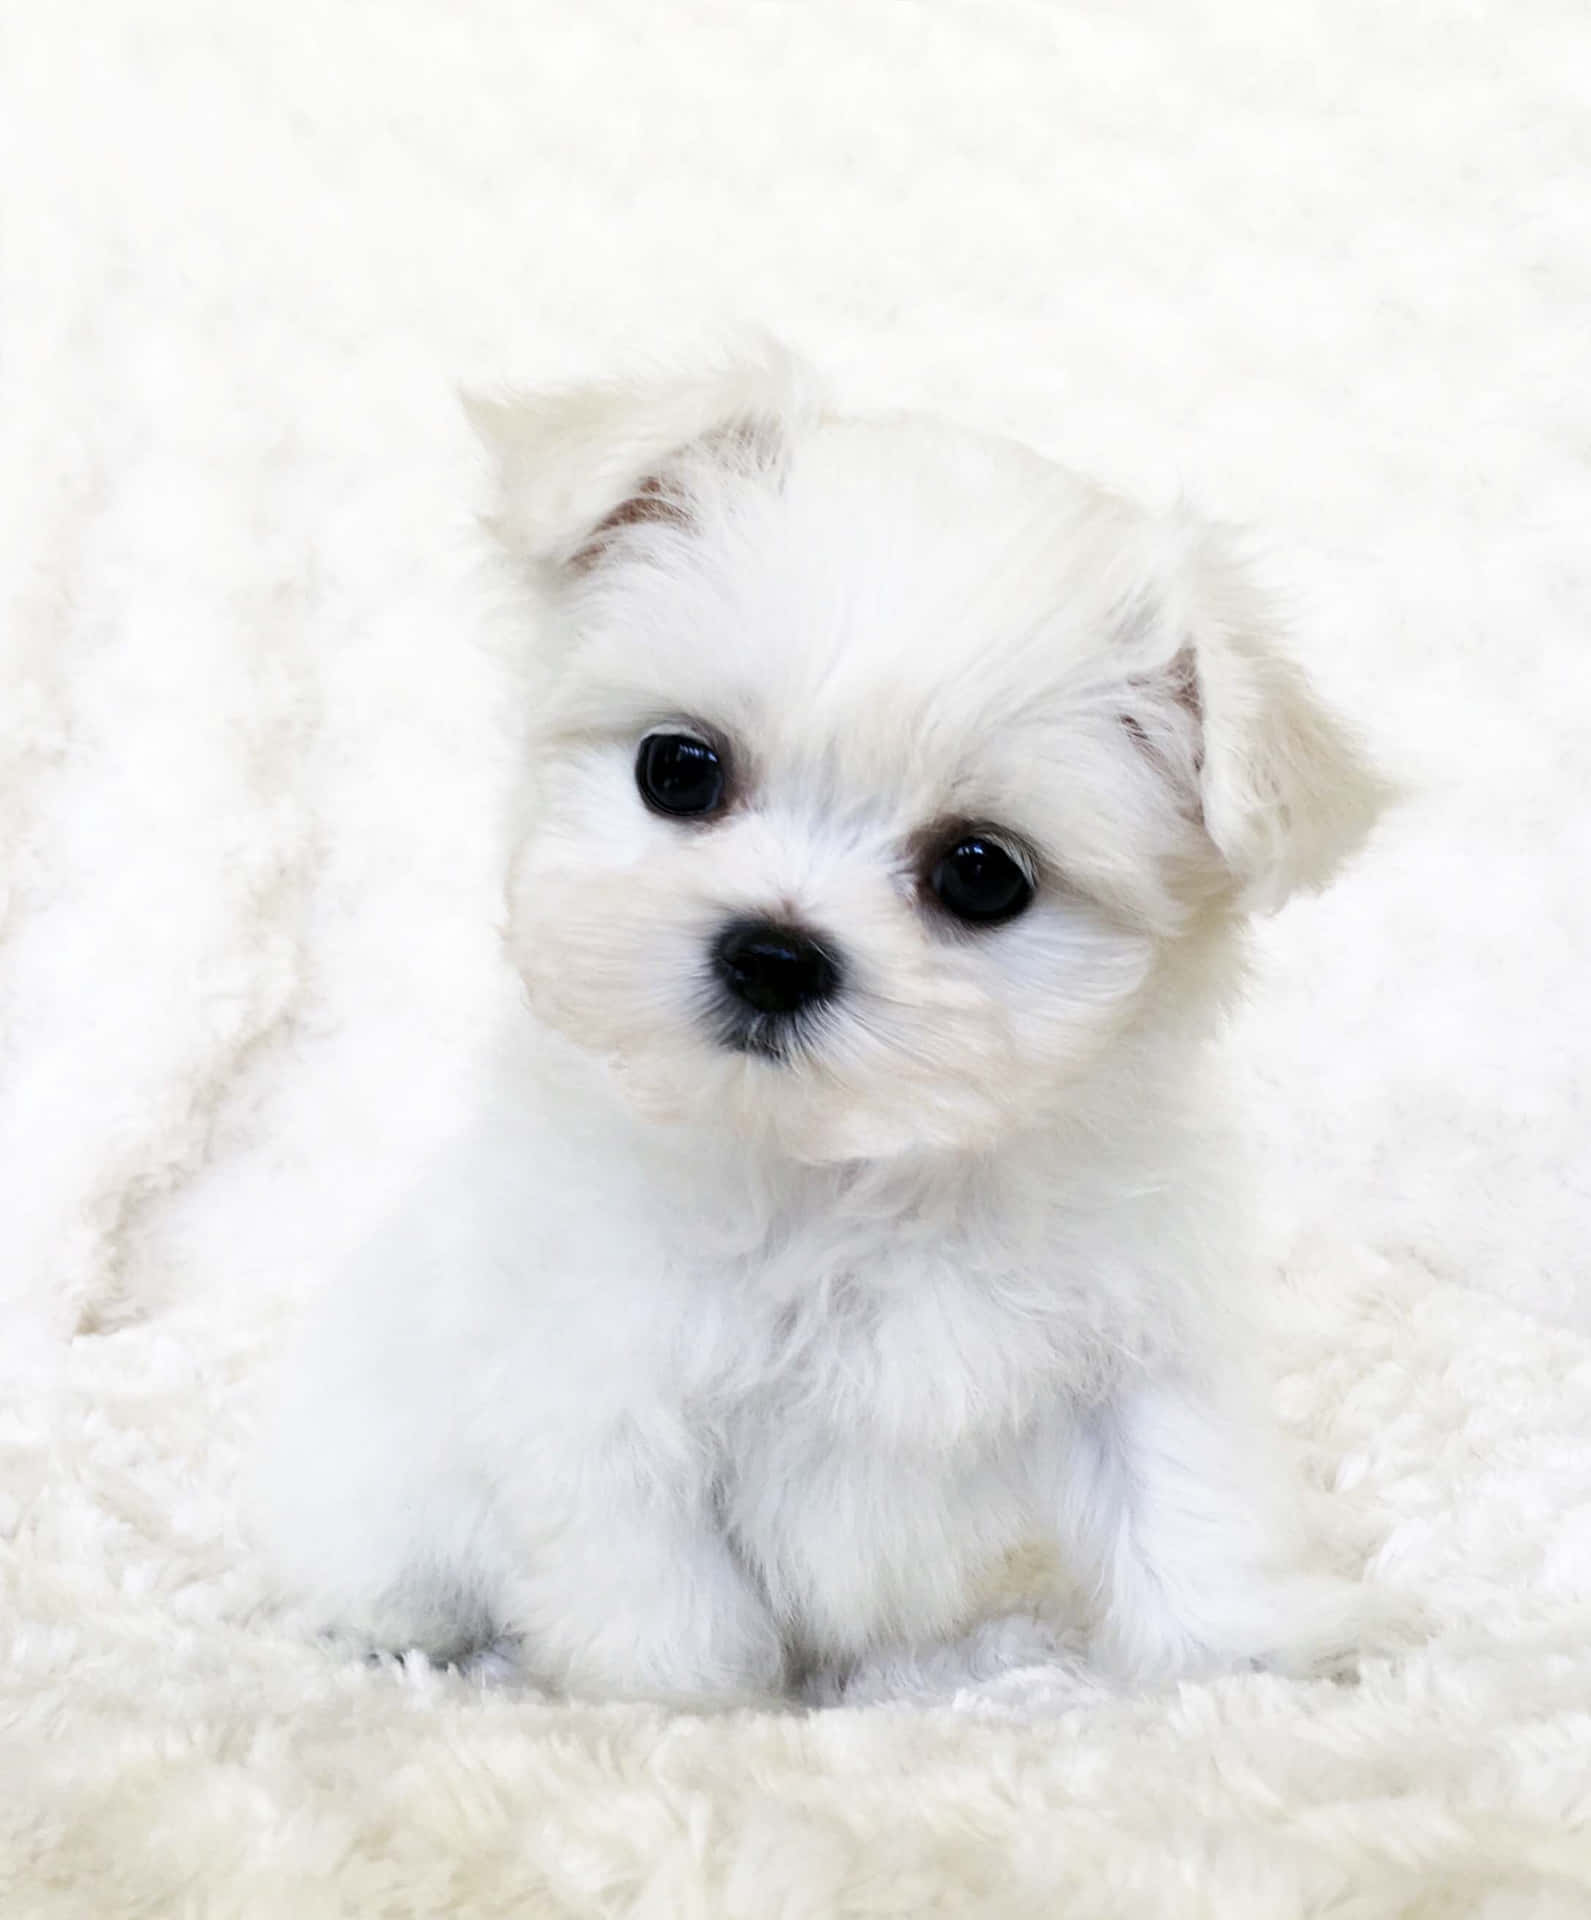 A Small White Puppy Sitting On A White Blanket